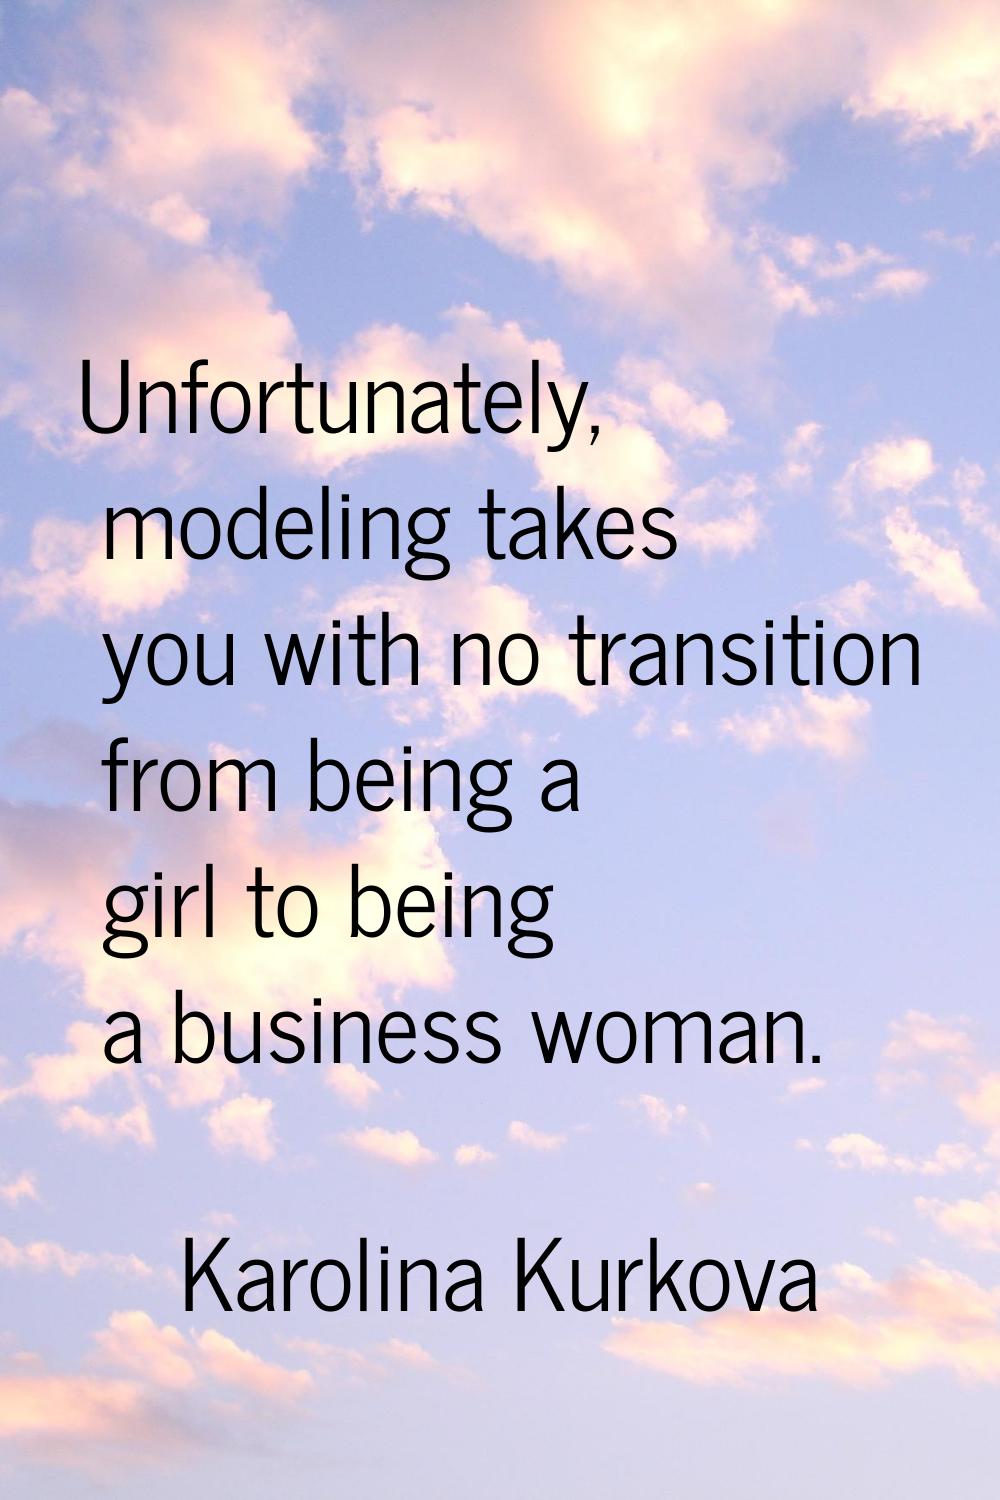 Unfortunately, modeling takes you with no transition from being a girl to being a business woman.